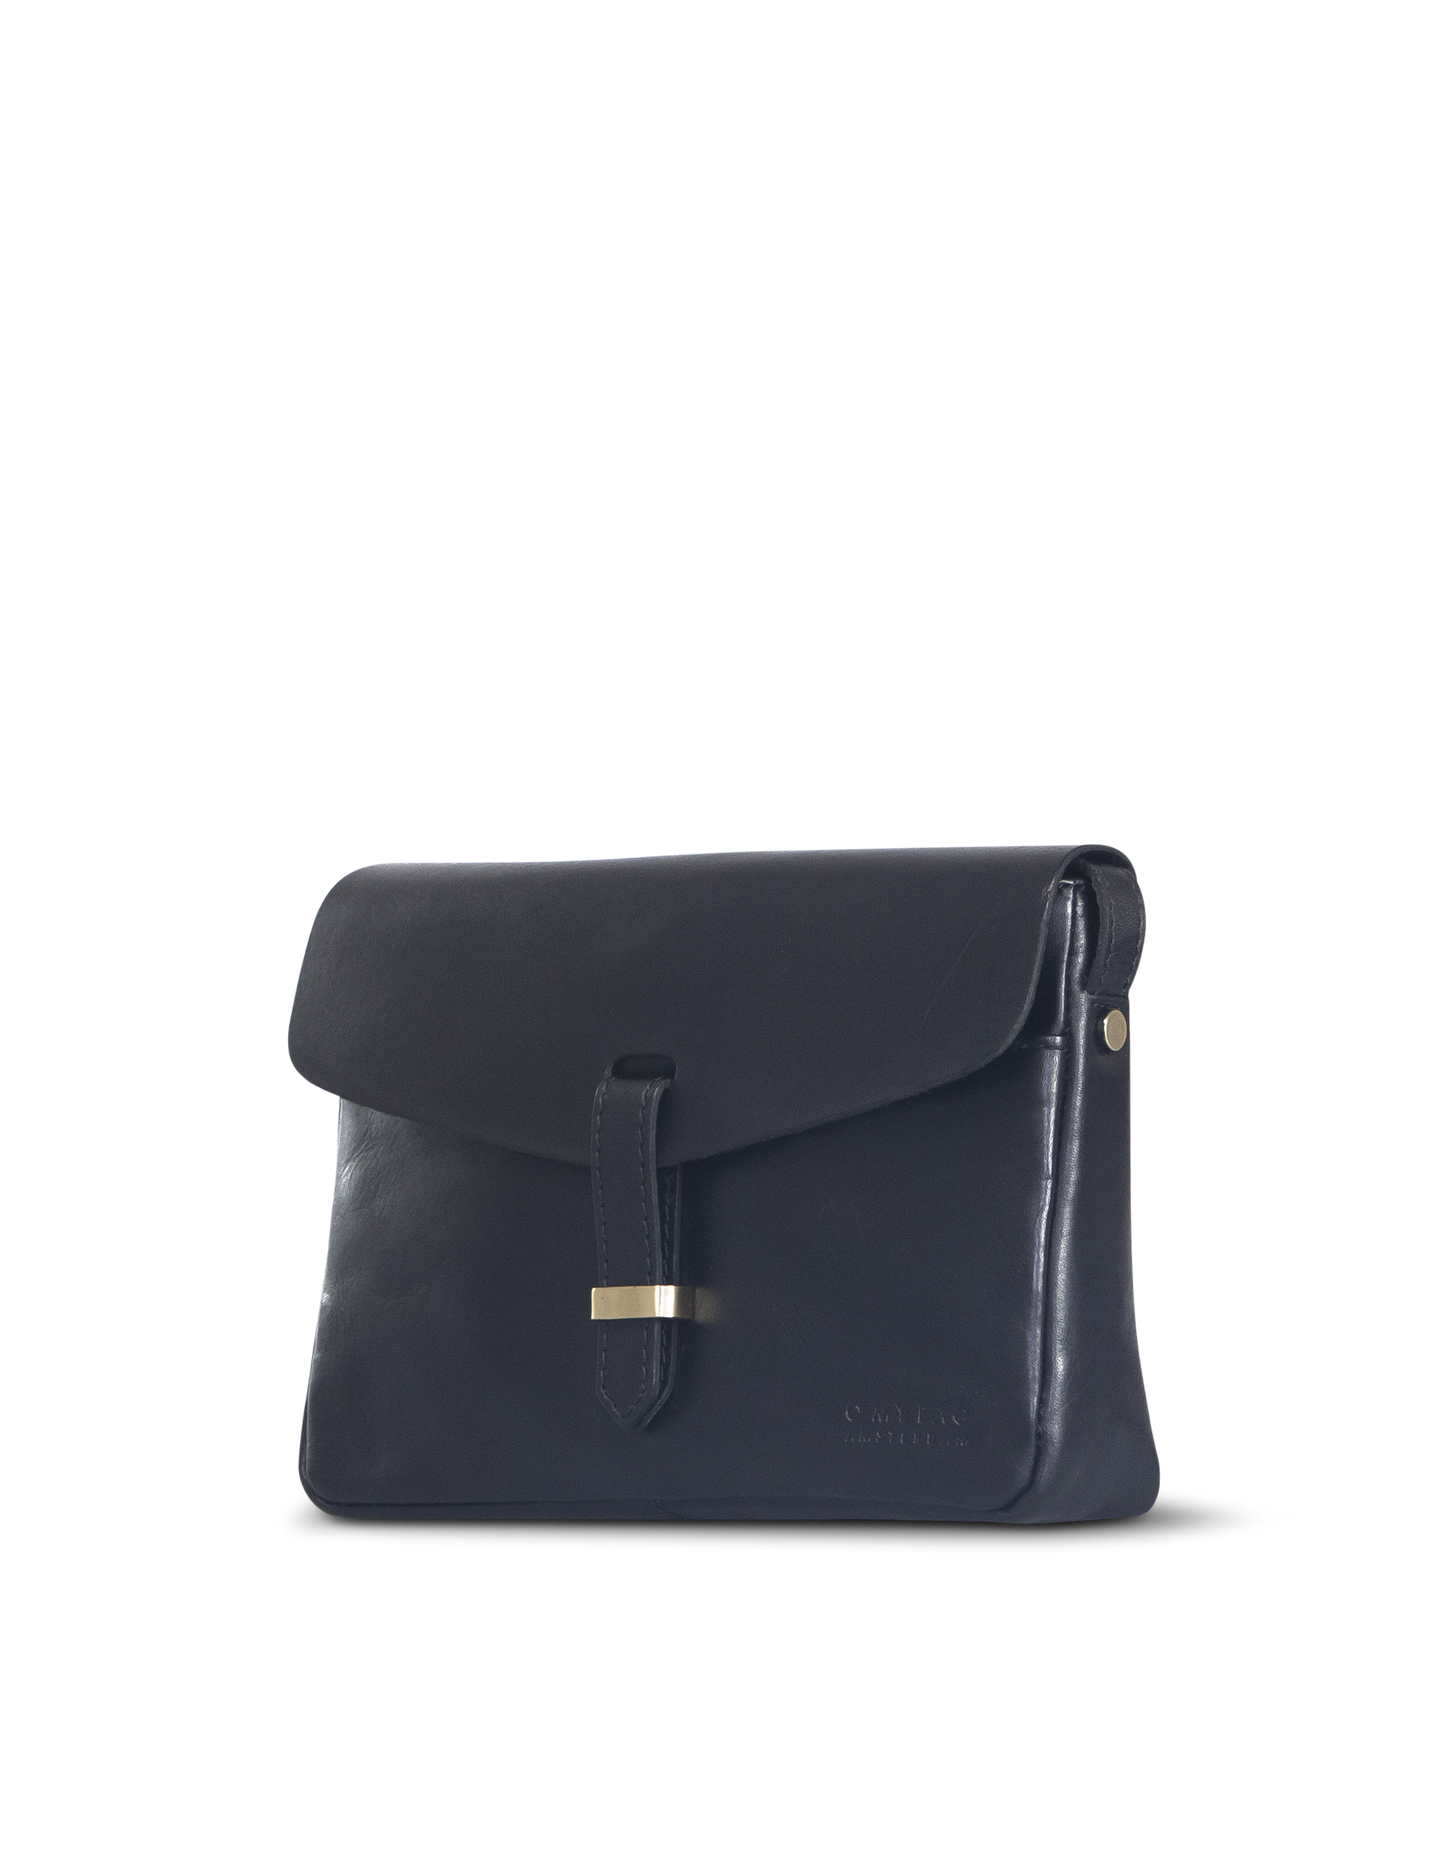 This elegant crossbody bag is a classic flap bag fitted with a beautiful strap closure. She’s as perfect as an evening purse as she is handy for all your daytime essentials. Modern in style and practical in function, the Ally Bag has one spacious main compartment that contains enough space for all your essentials.